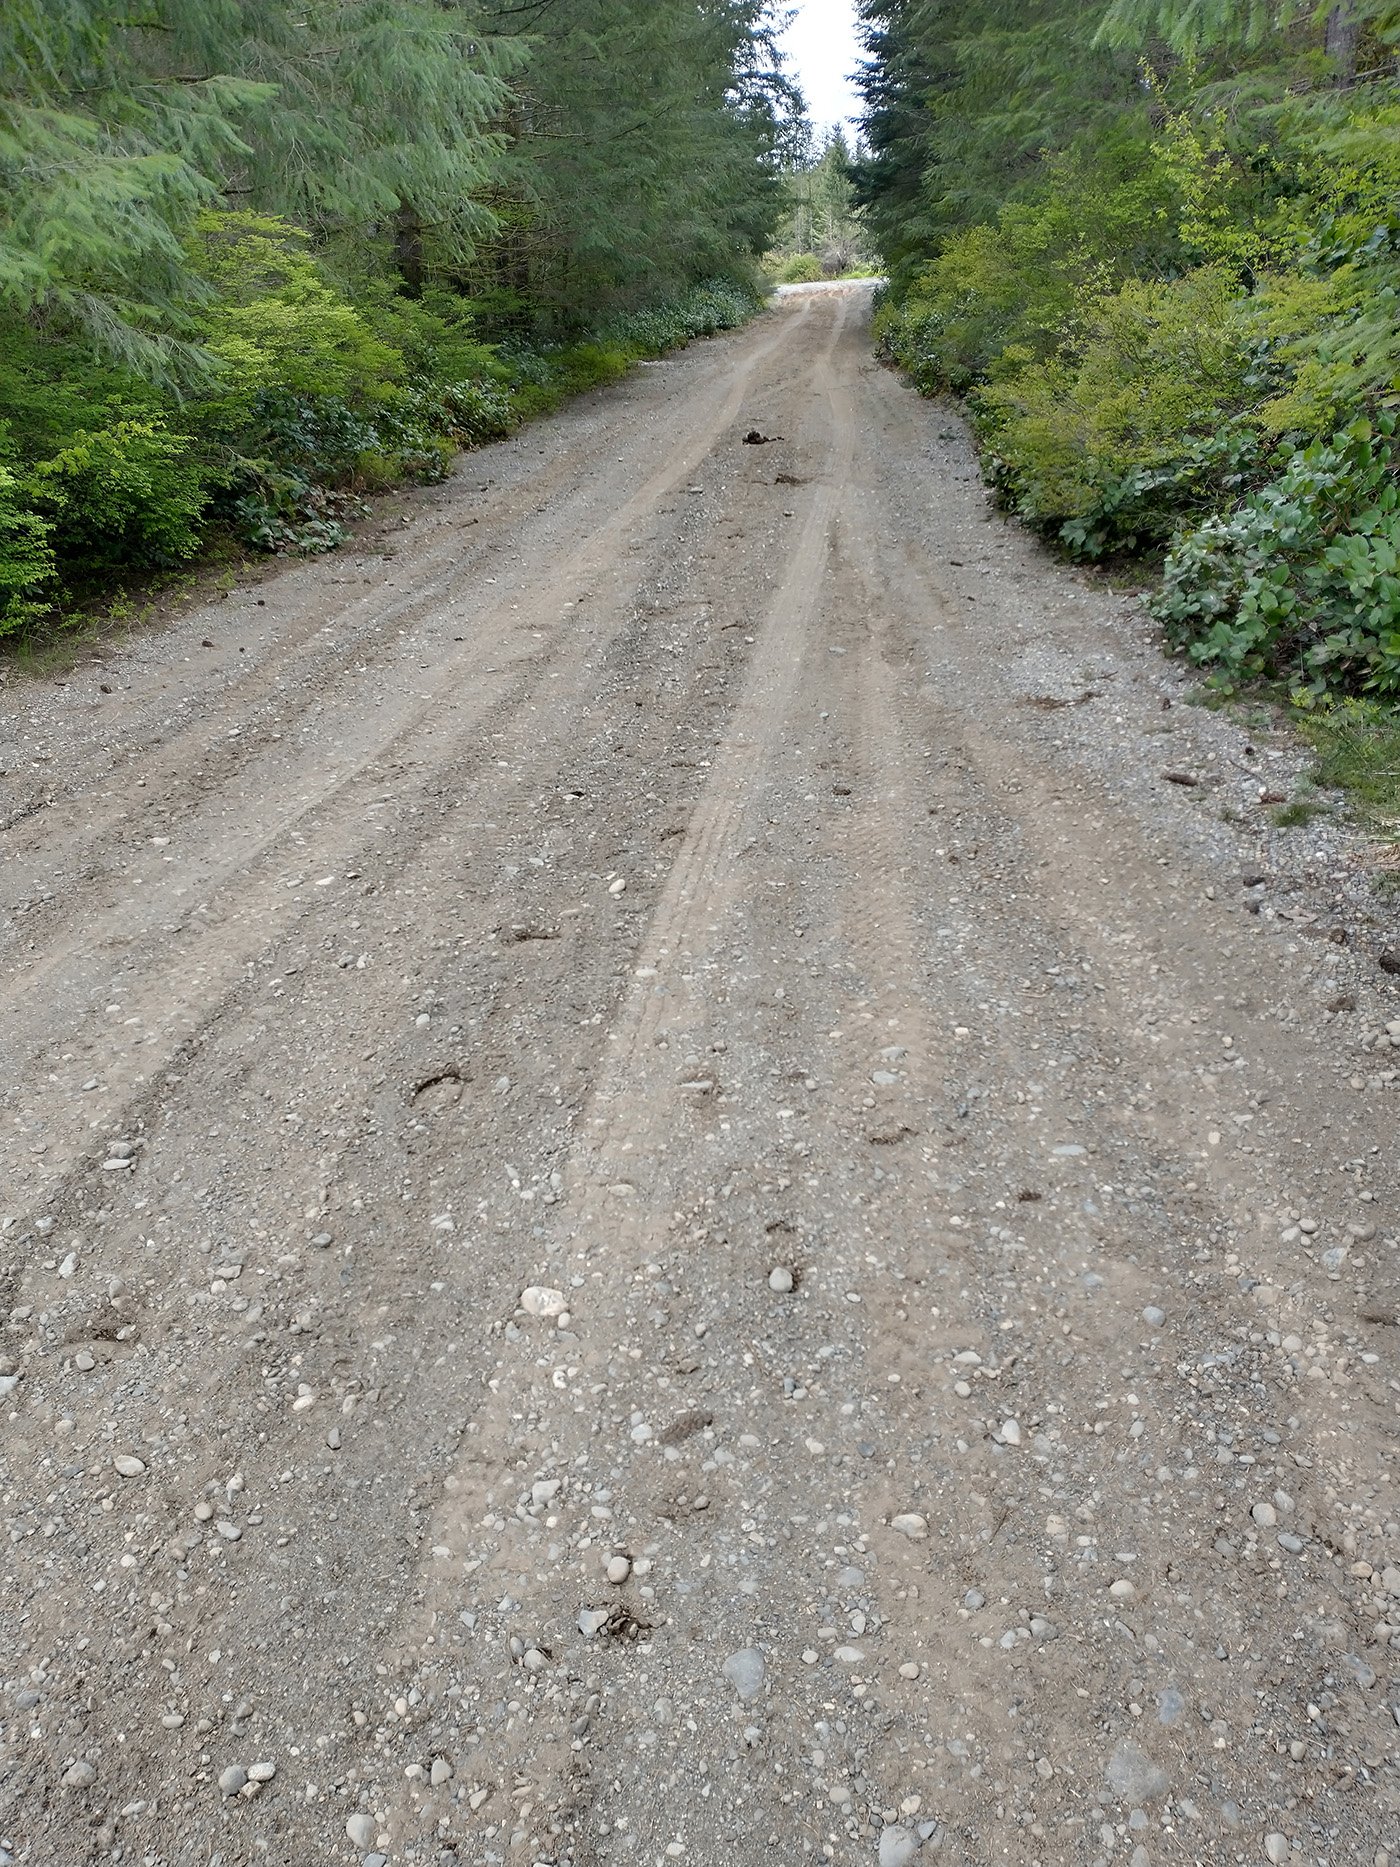  Sometimes you plan loops on Strava and they call things like this “paved”. Then you need to decide if you want to ride 5km on literal dirt trails or just go back. 